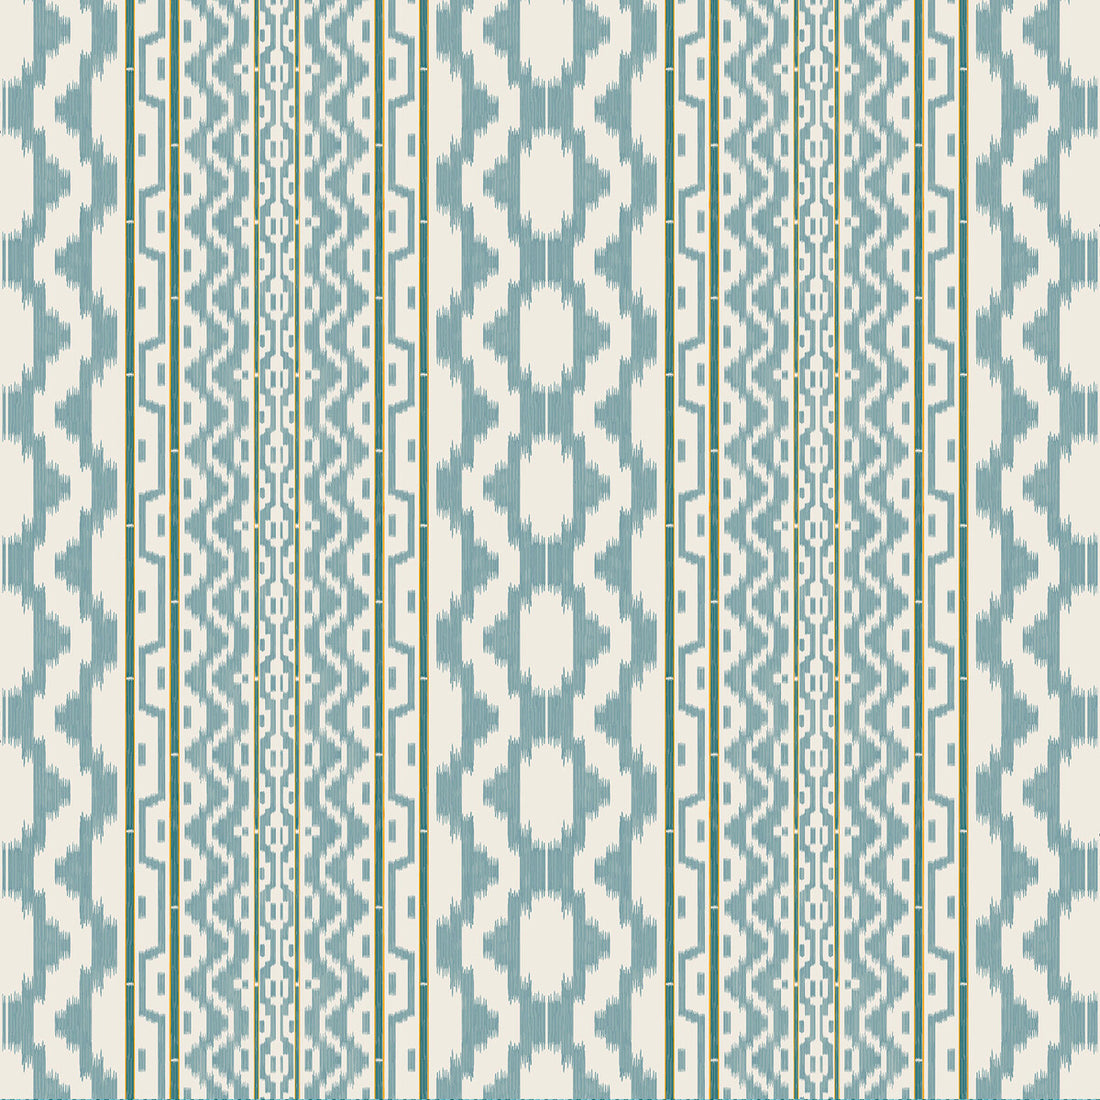 Cala Murada fabric in azul color - pattern GDT5682.001.0 - by Gaston y Daniela in the Gaston Maiorica collection